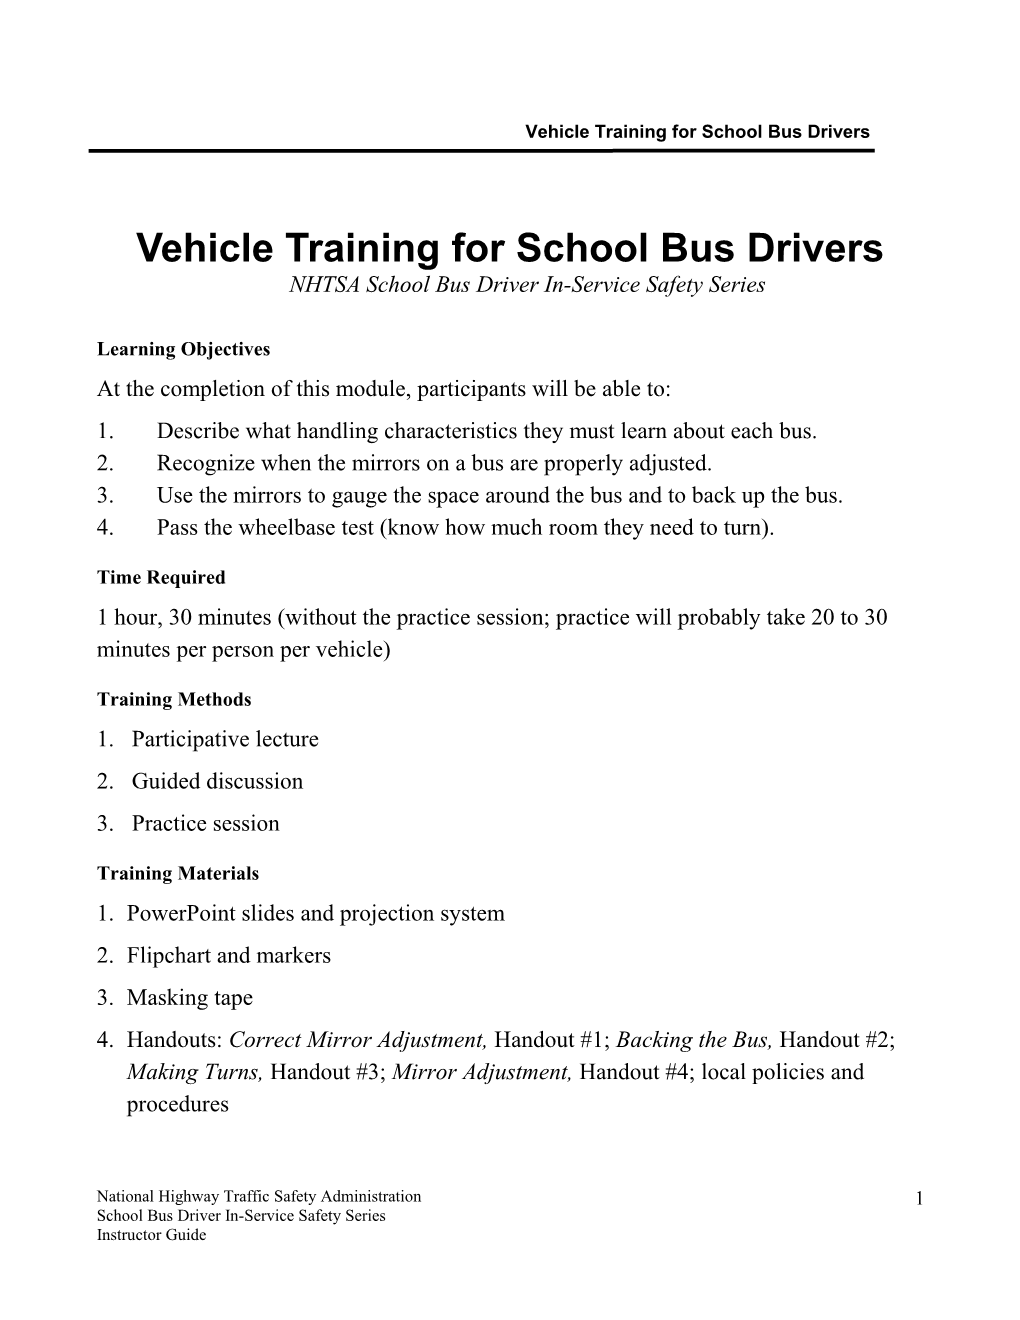 Student Management for School Bus Drivers